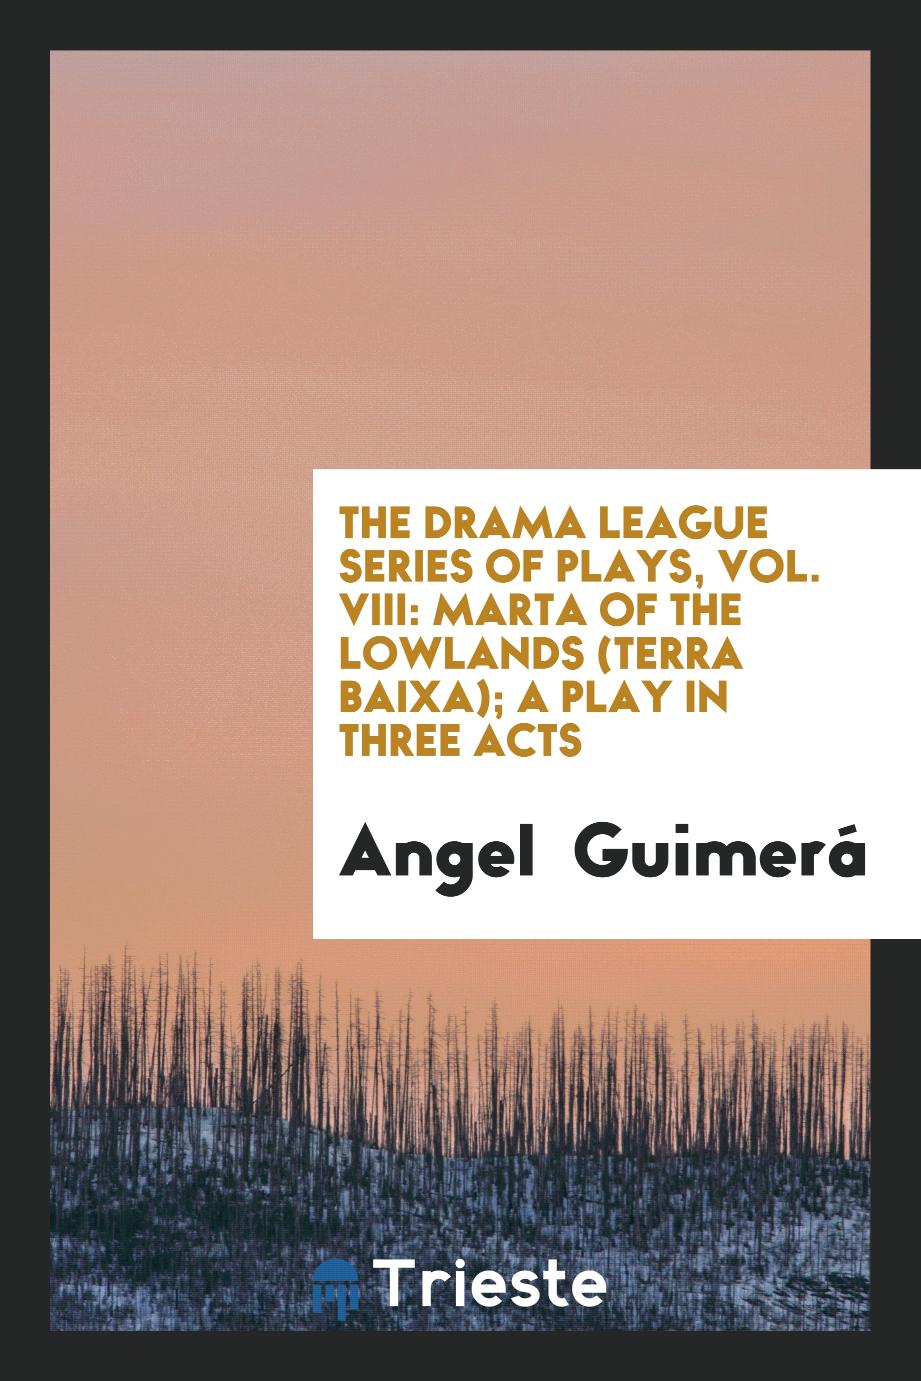 The Drama League Series of Plays, Vol. VIII: Marta of the Lowlands (Terra Baixa); A Play in Three Acts